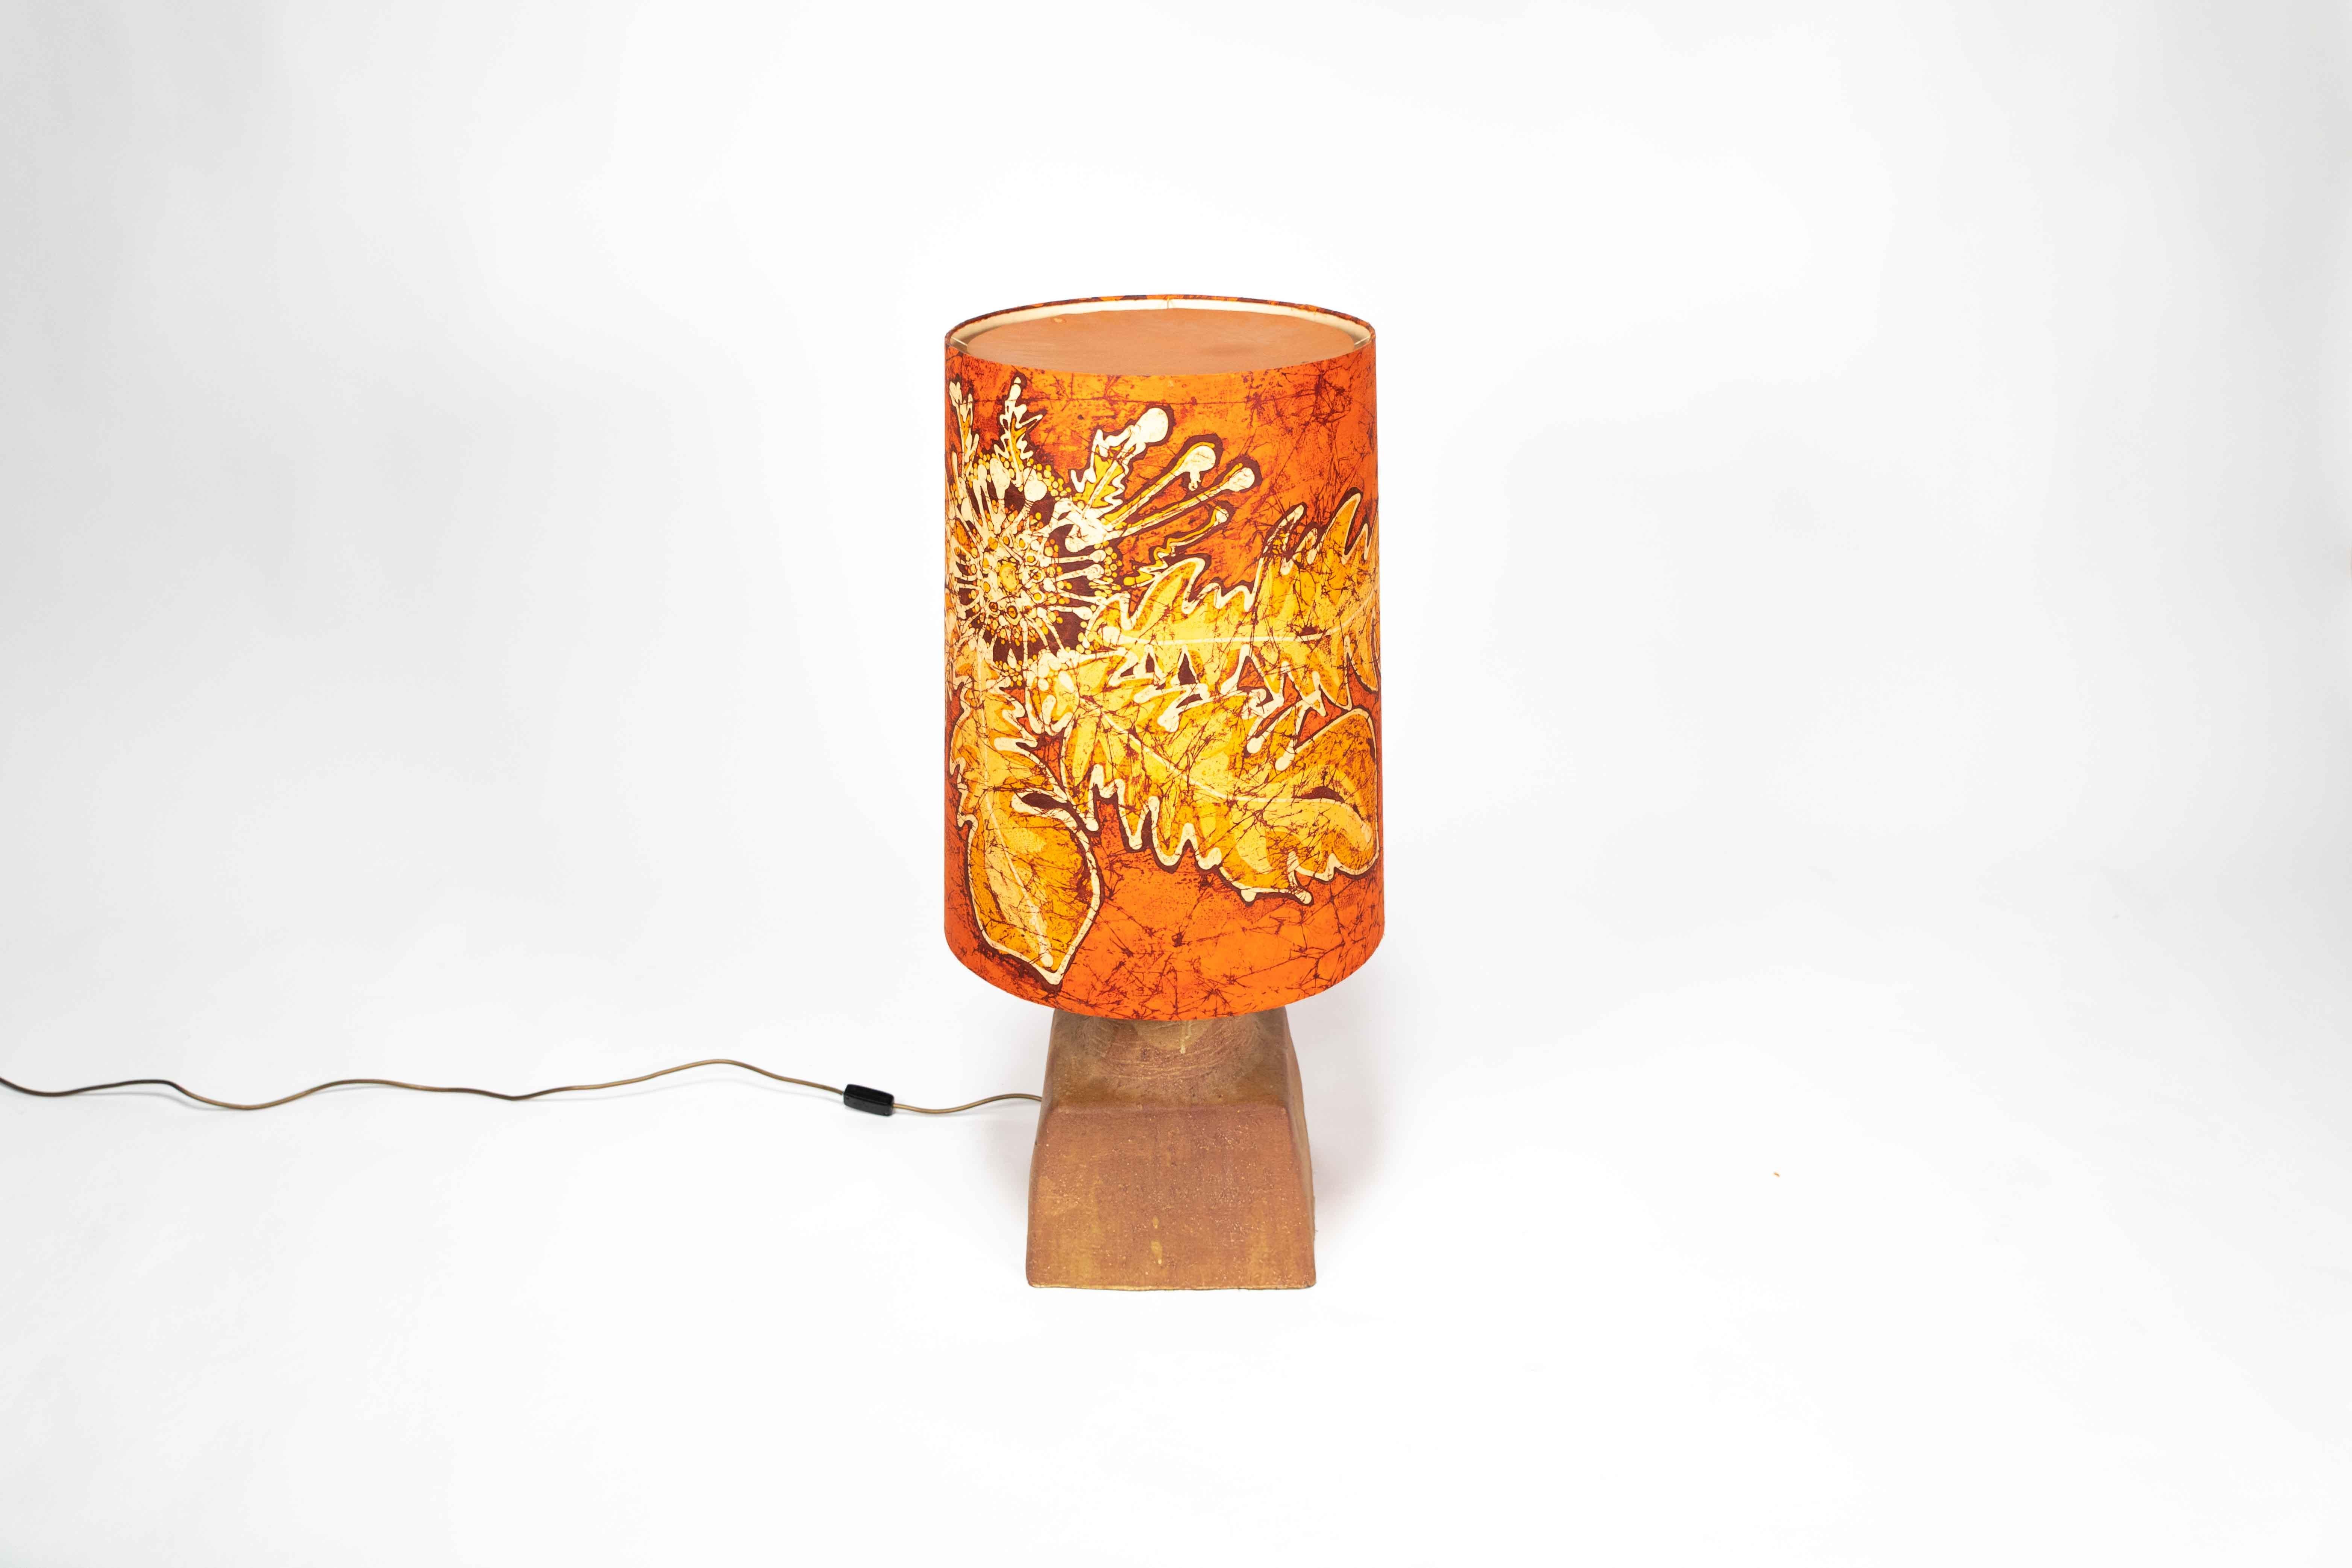 The lamp from the studio Marianne Koplin is handmade.
The base of the lamp made of earth-colored ceramics has a signature on the bottom, as well as the lampshade made of batik.
The lamp is in good condition and gives a warm light when illuminated.